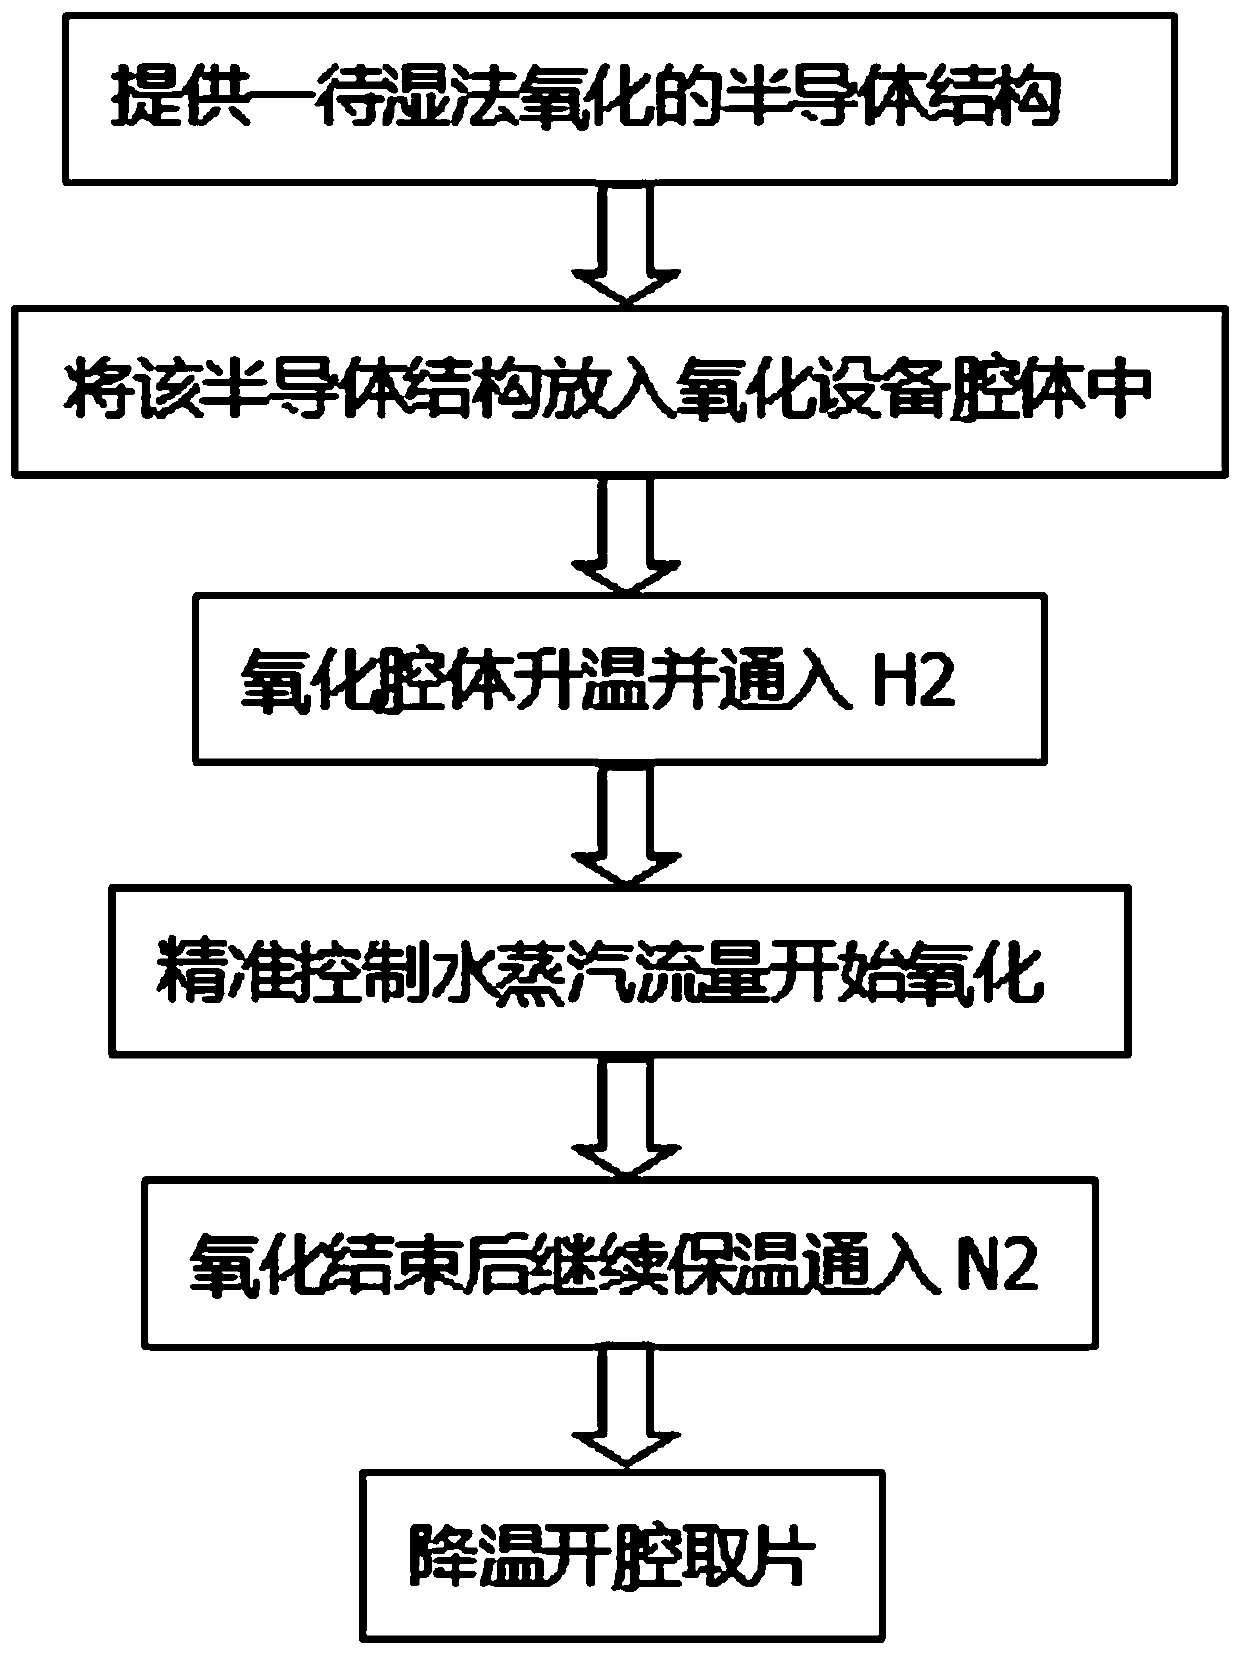 Wet oxidation process for improving oxidation uniformity of vertical cavity surface emitting laser